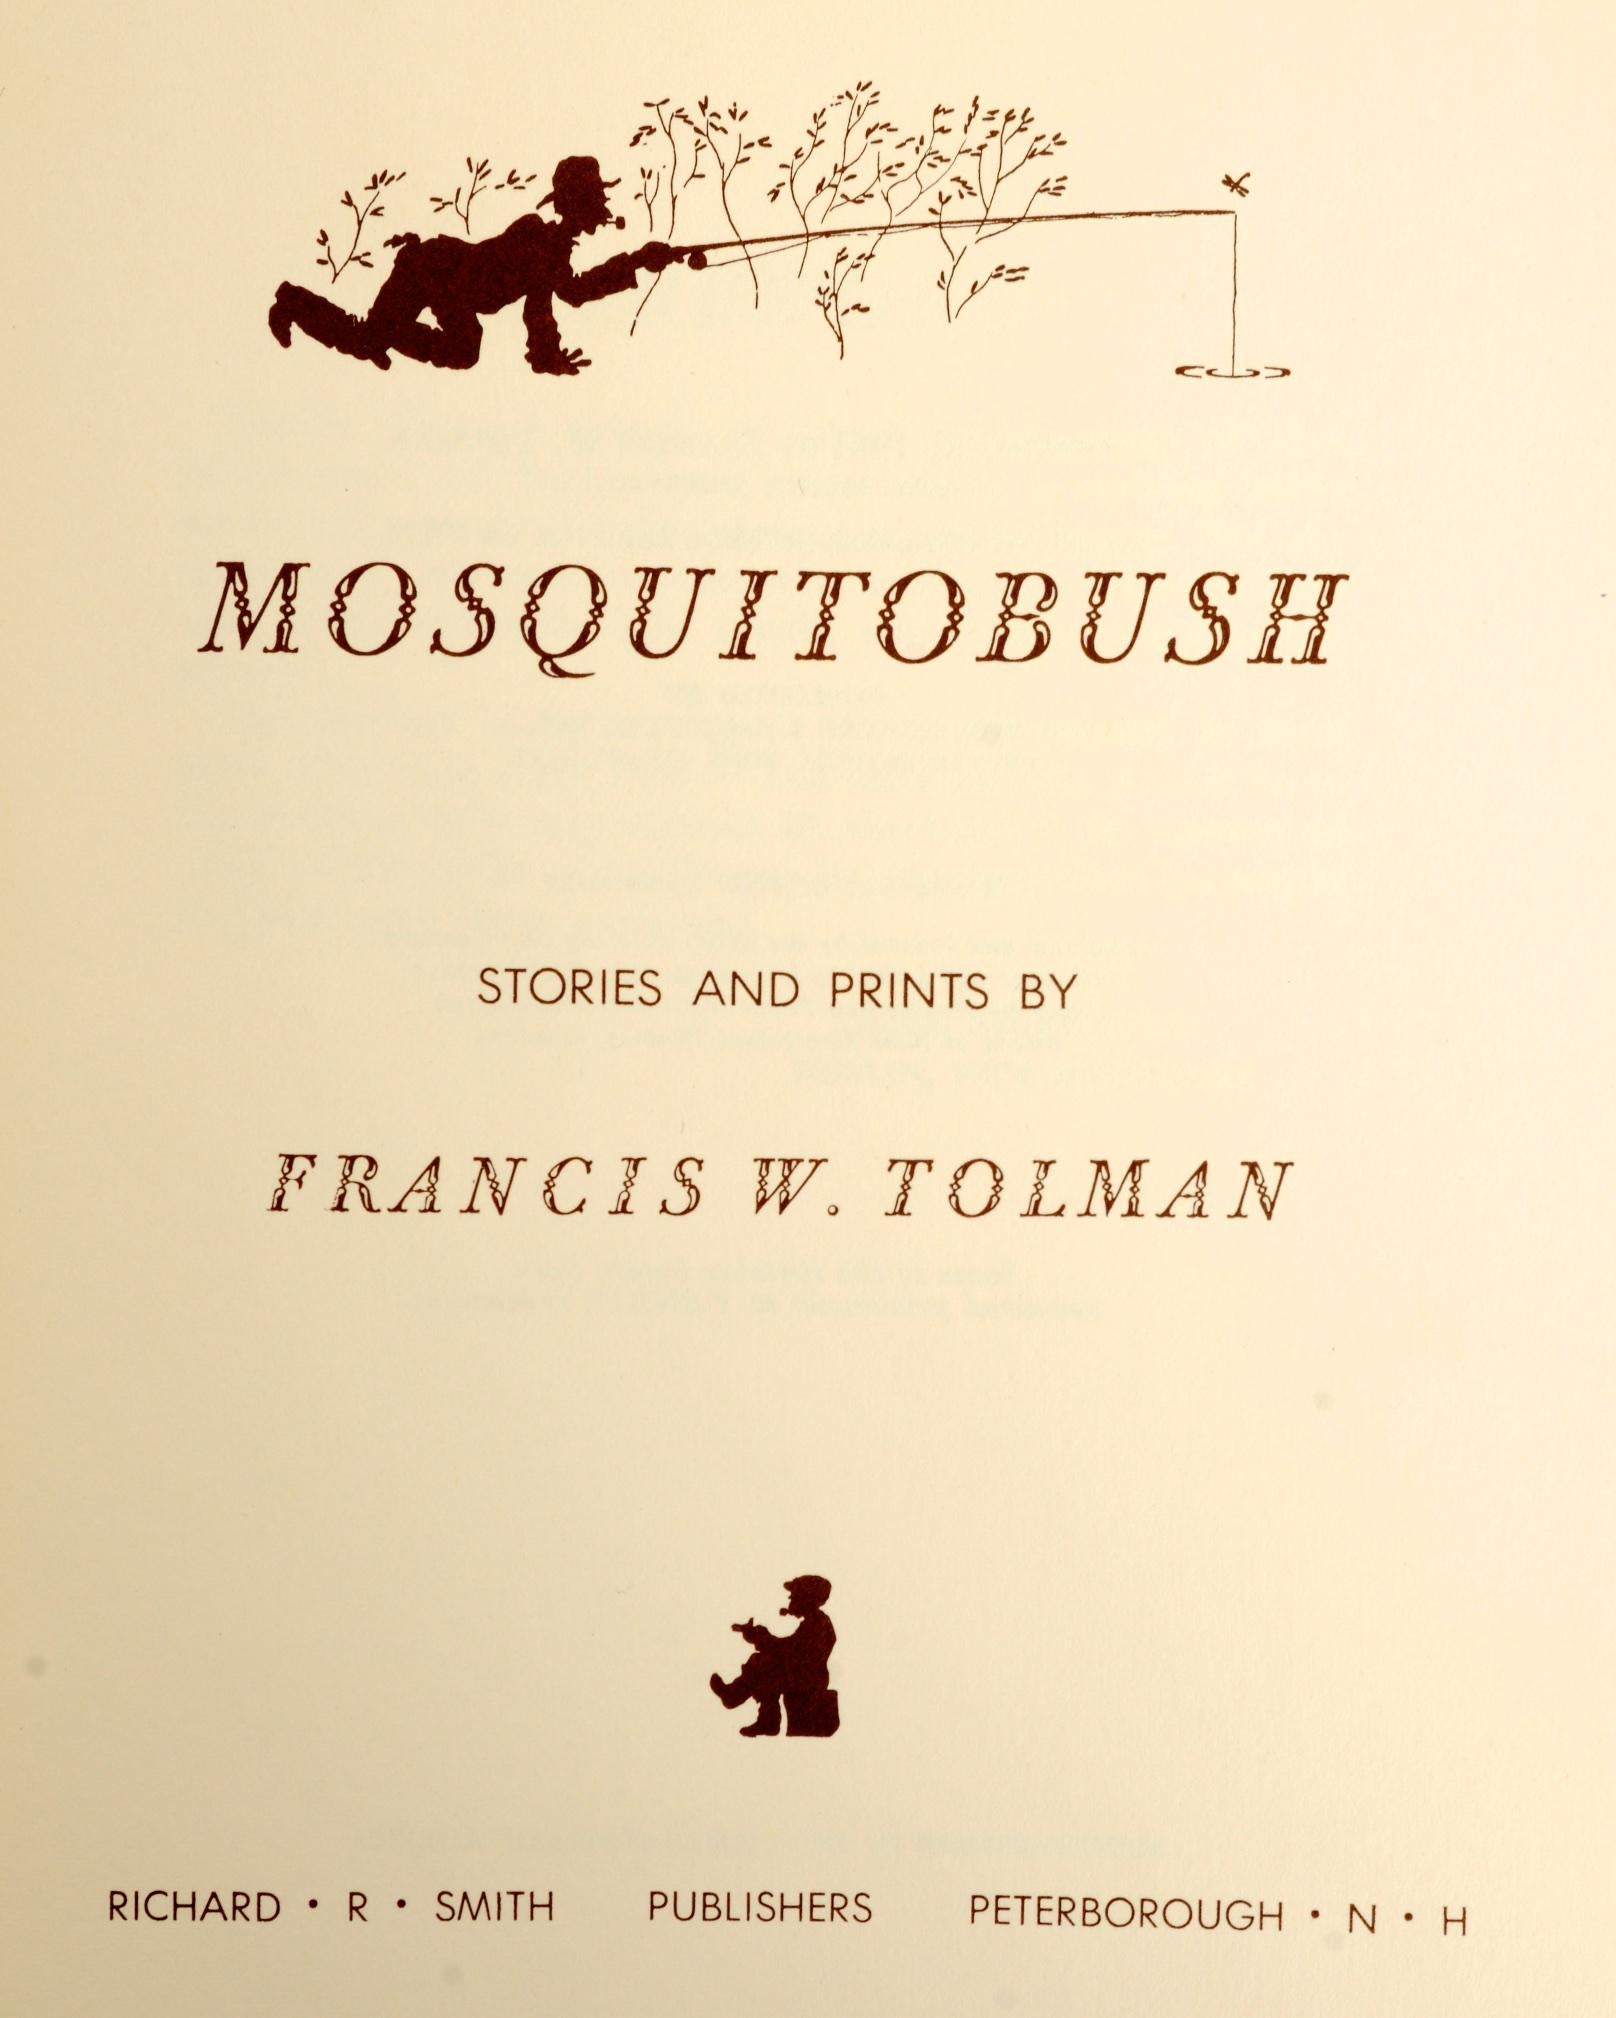 Mosquitobush Stories and Prints by Francis Tolman. Richard R Smith, New Hampshire, 1963. Signed and inscribed by the author first edition hardcover with Broadart covered dust jacket. Written and illustrated by the author. A collection of witty